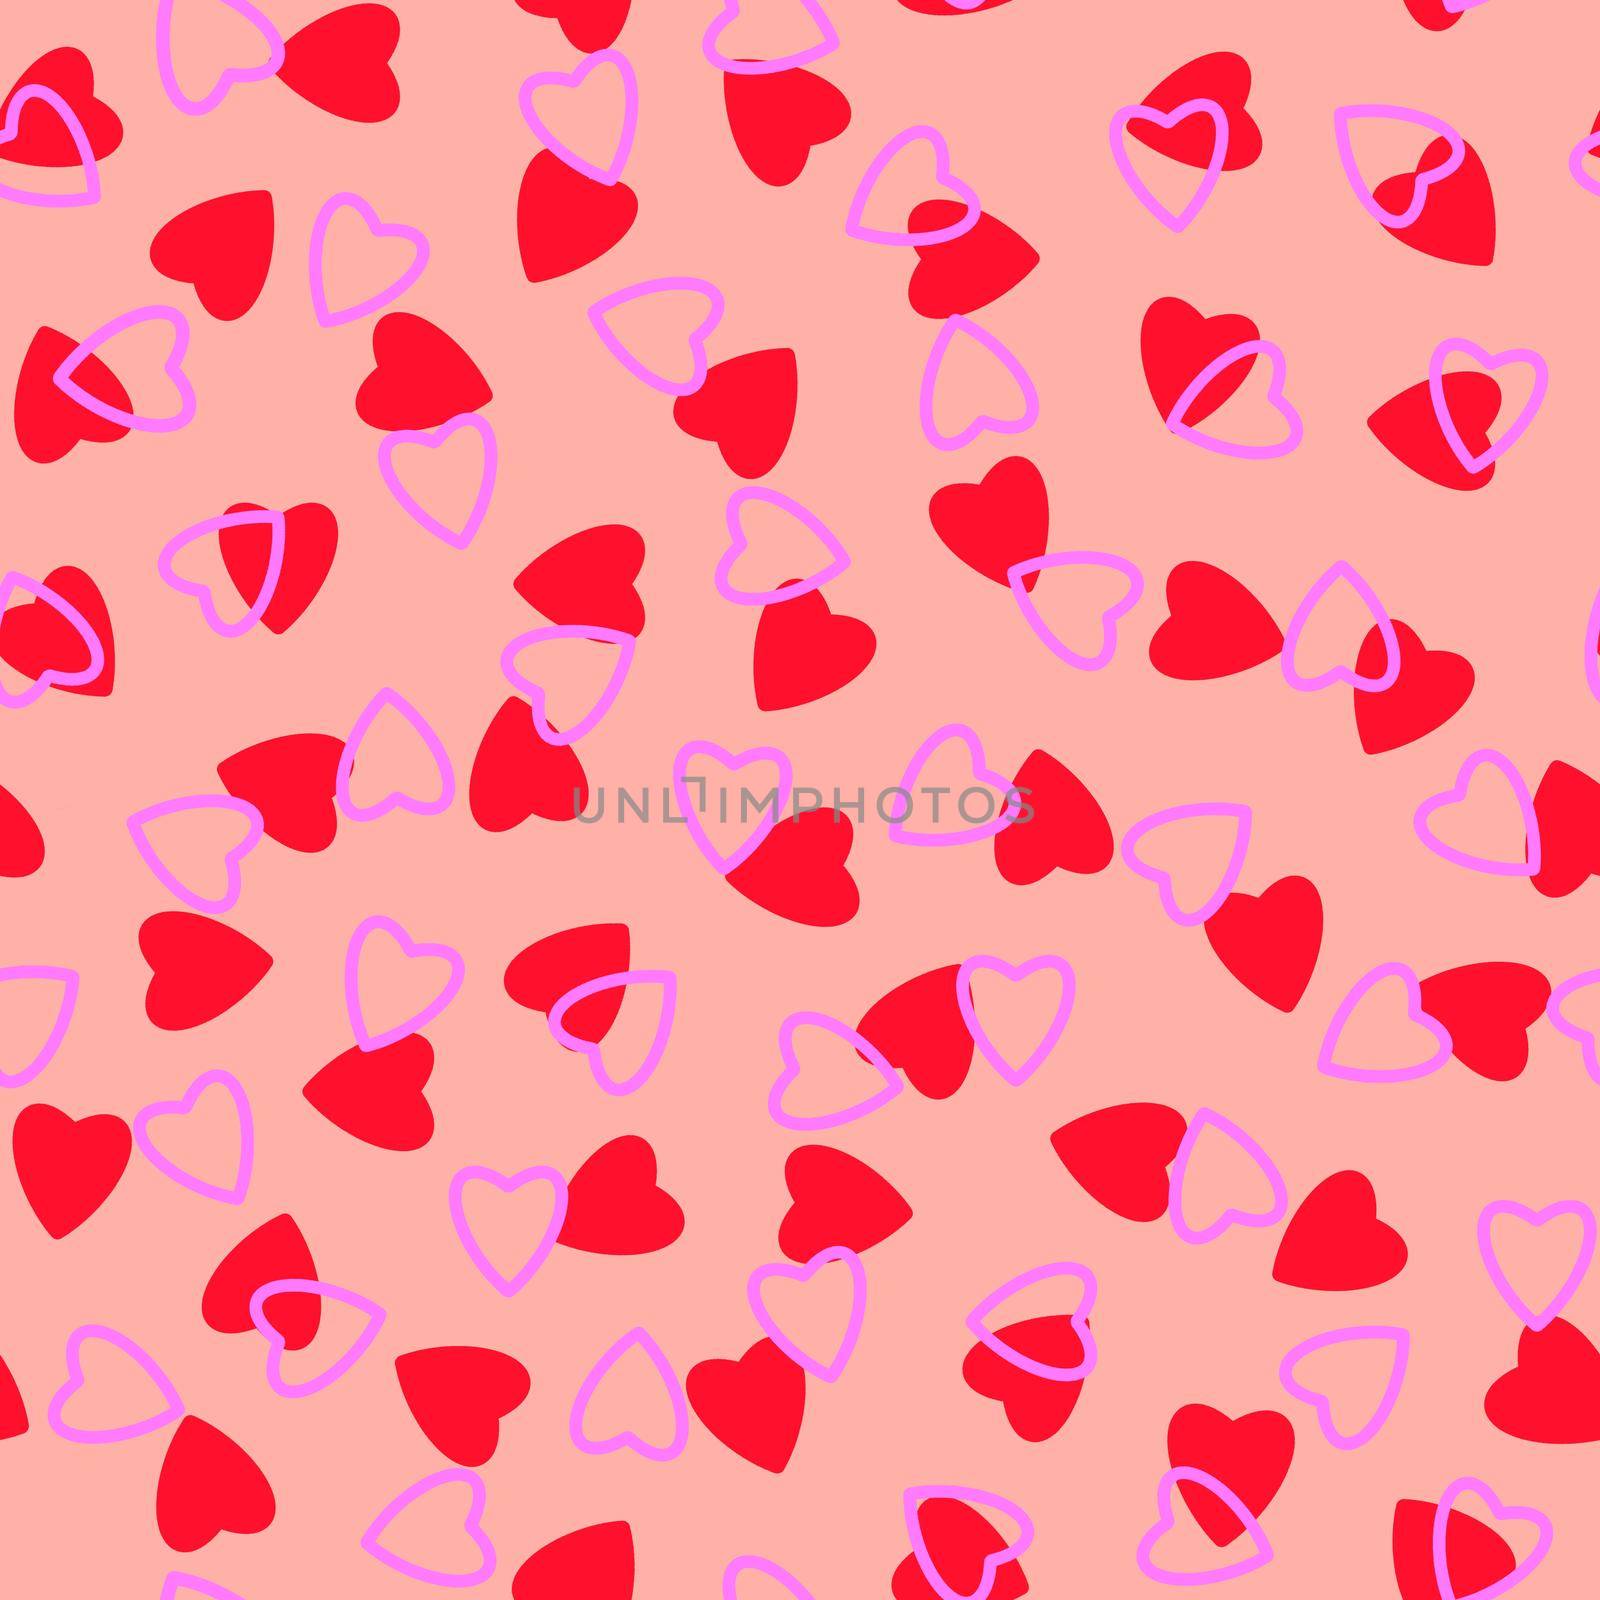 Simple hearts seamless pattern,endless chaotic texture made of tiny heart silhouettes.Valentines,mothers day background.Great for Easter,wedding,scrapbook,gift wrapping paper,textiles.Red,lilac,pink by Angelsmoon